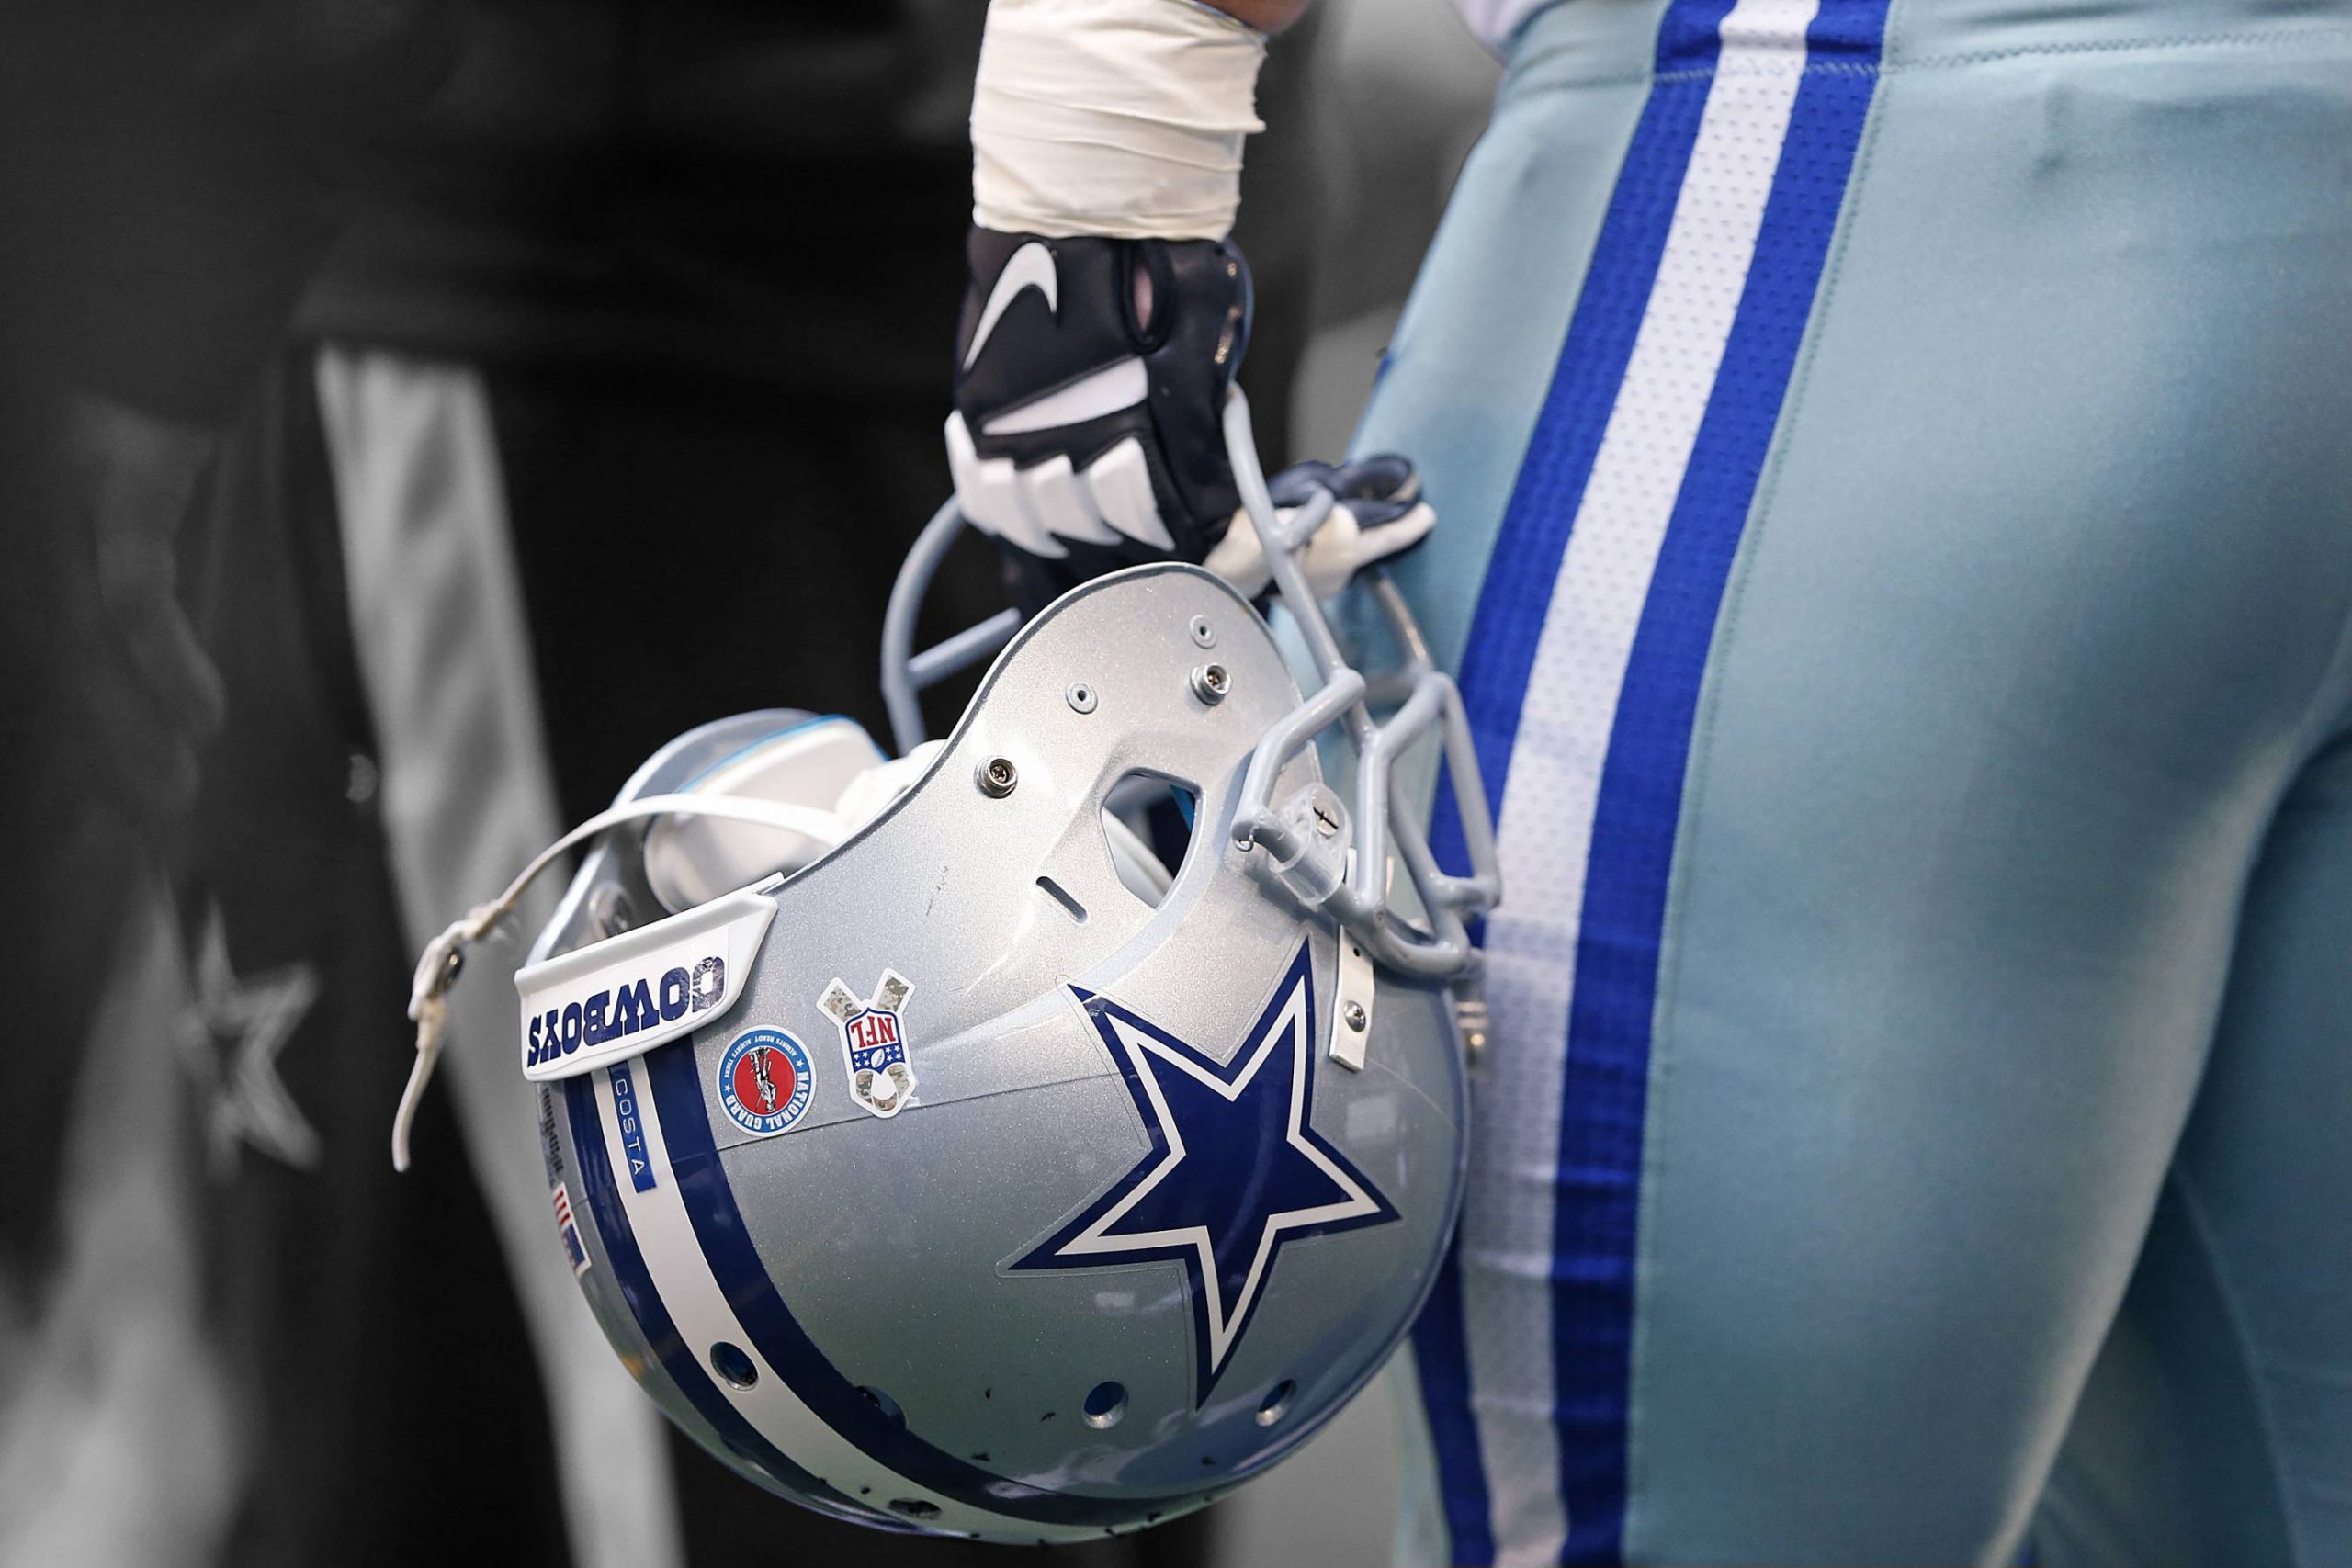 Dallas Cowboys Helmet held in hand by a player